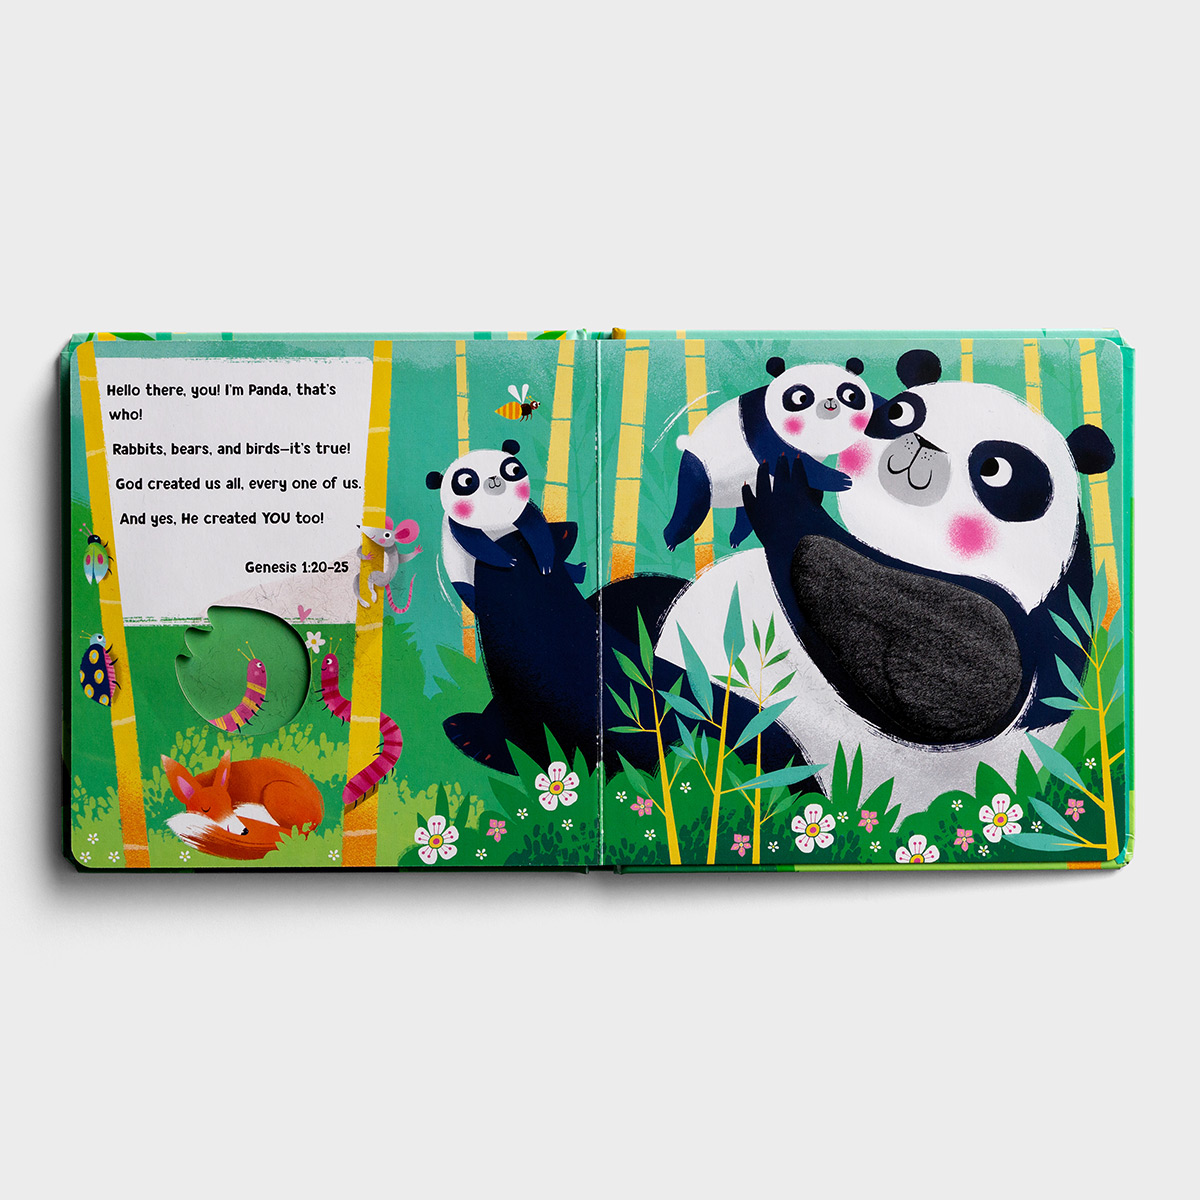 Meet Panda and His Furry Friends - Touch 'N' Feel Board Book